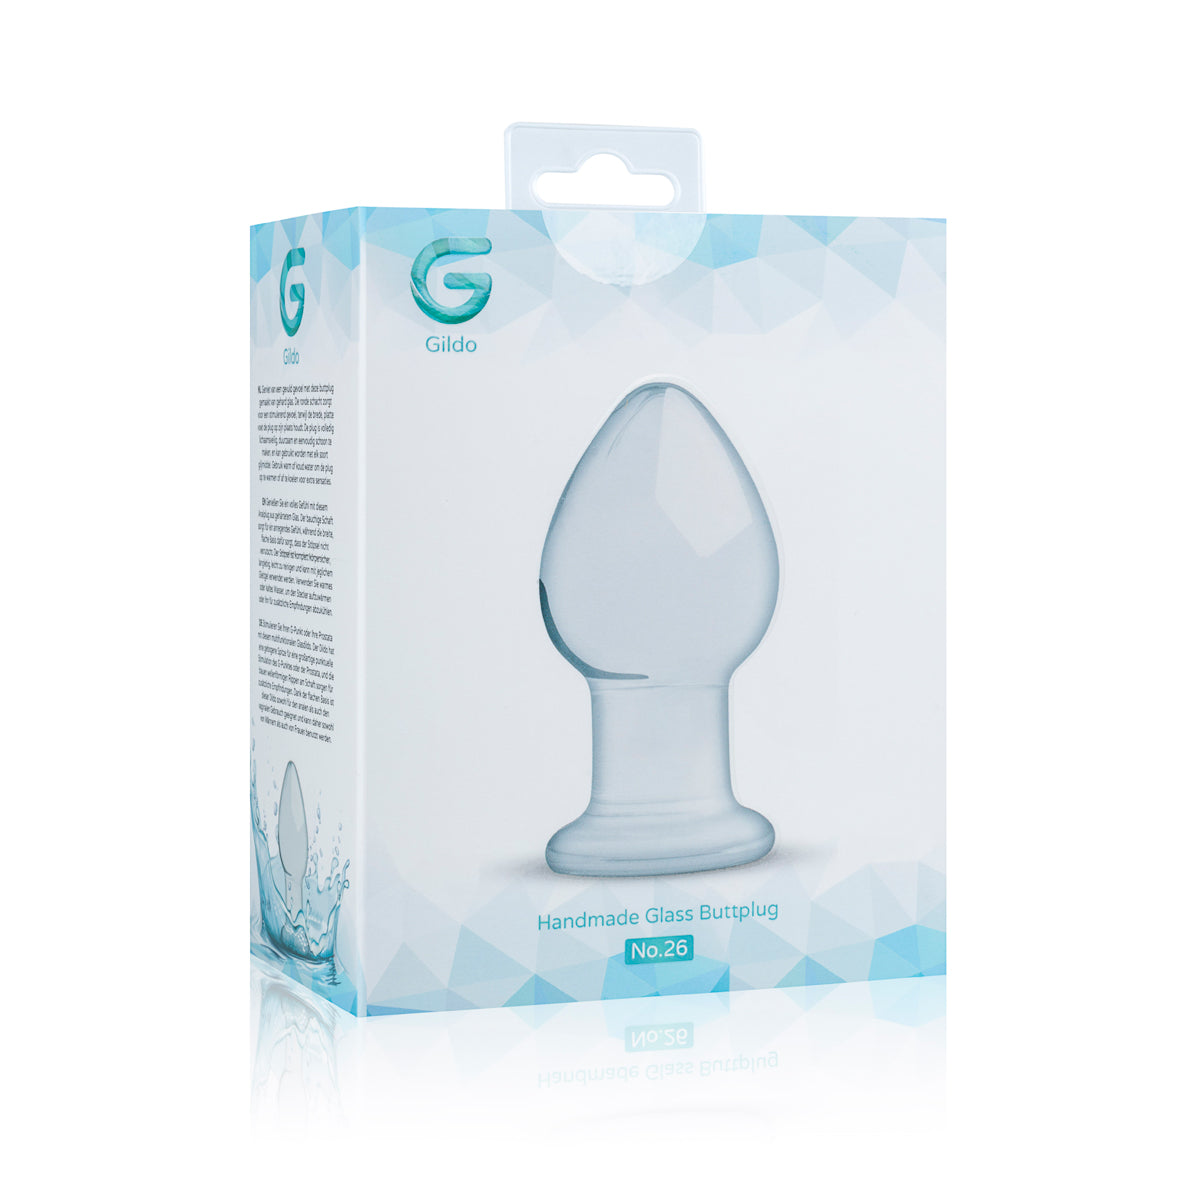 Glass Buttplug No 26 - Just for you desires